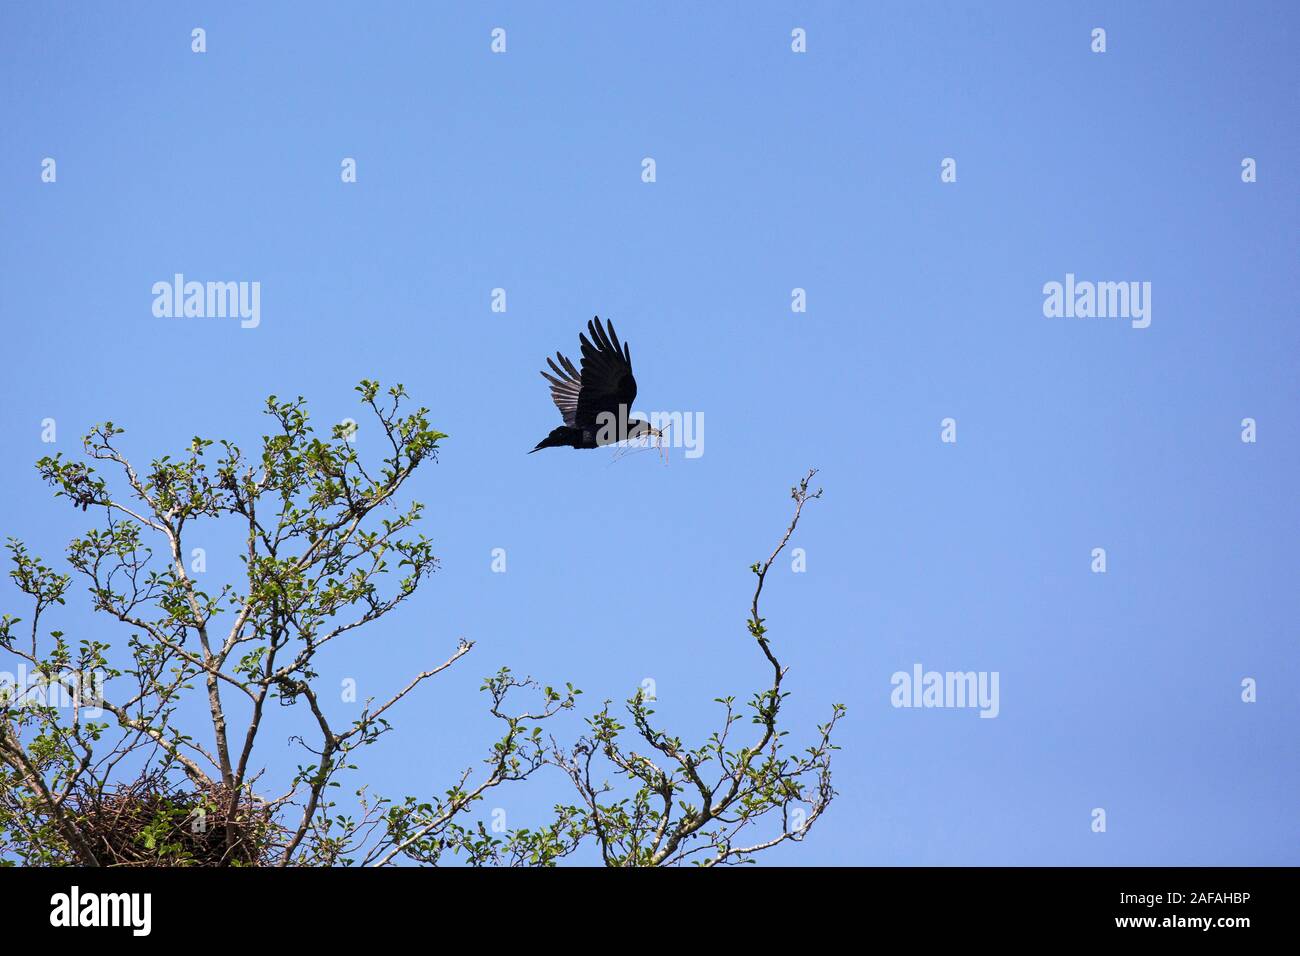 Rook Corvus frugilegus taking off from rookery in an Alder Alnus glutinosa, Ringwood, Hampshire, England, UK, April 2018 Stock Photo